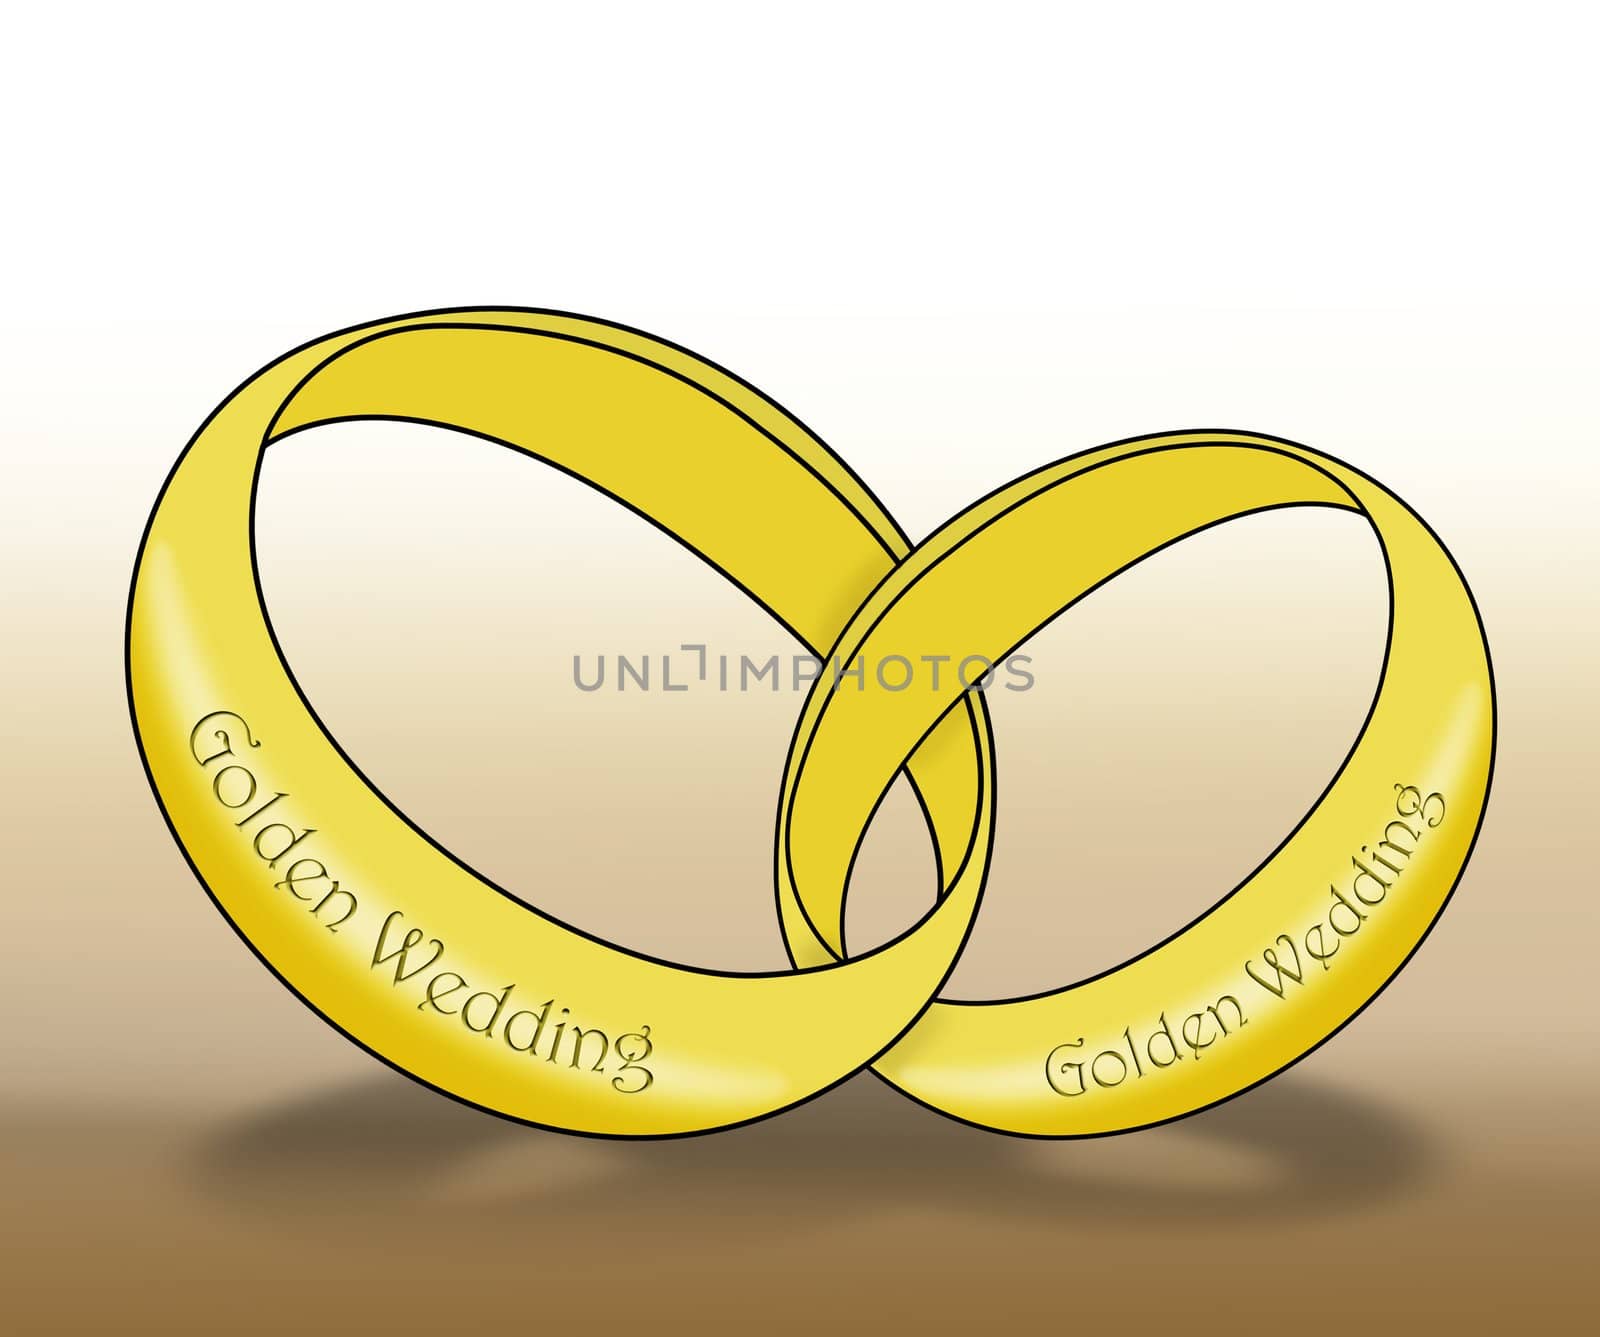 Linked Golden Wedding Rings by rts8459